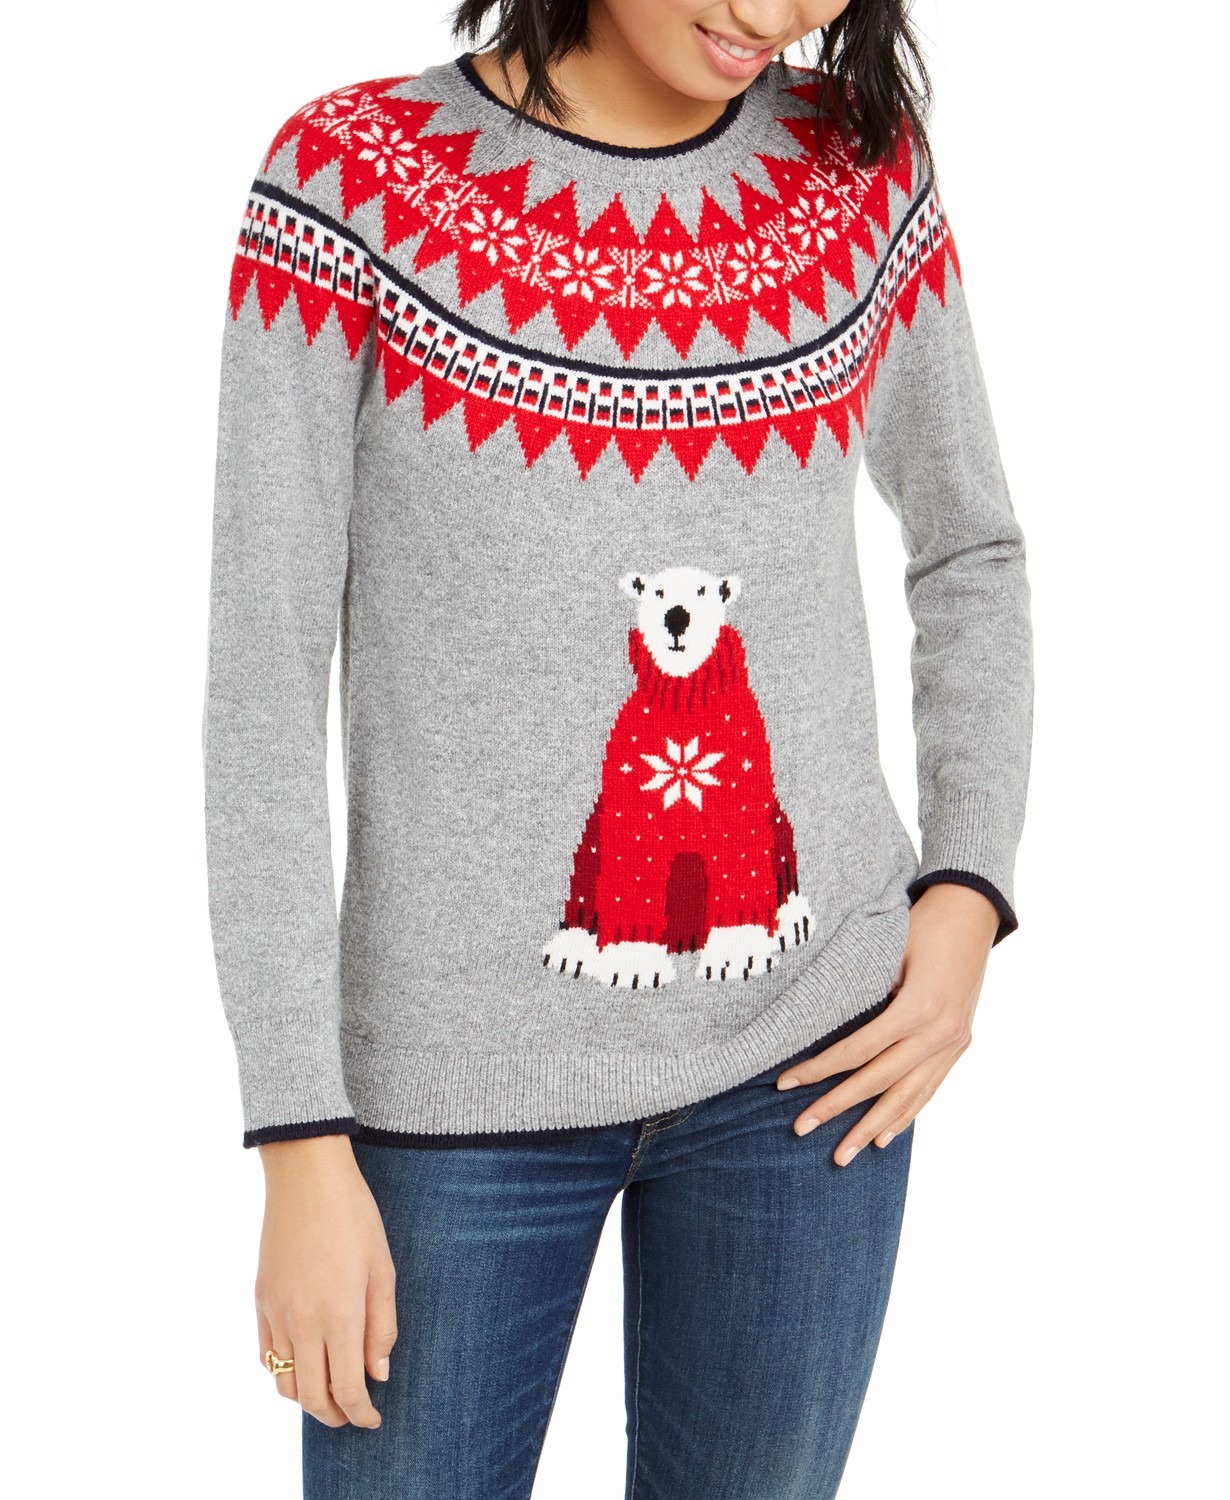 12 Awesome Christmas Sweaters! 89